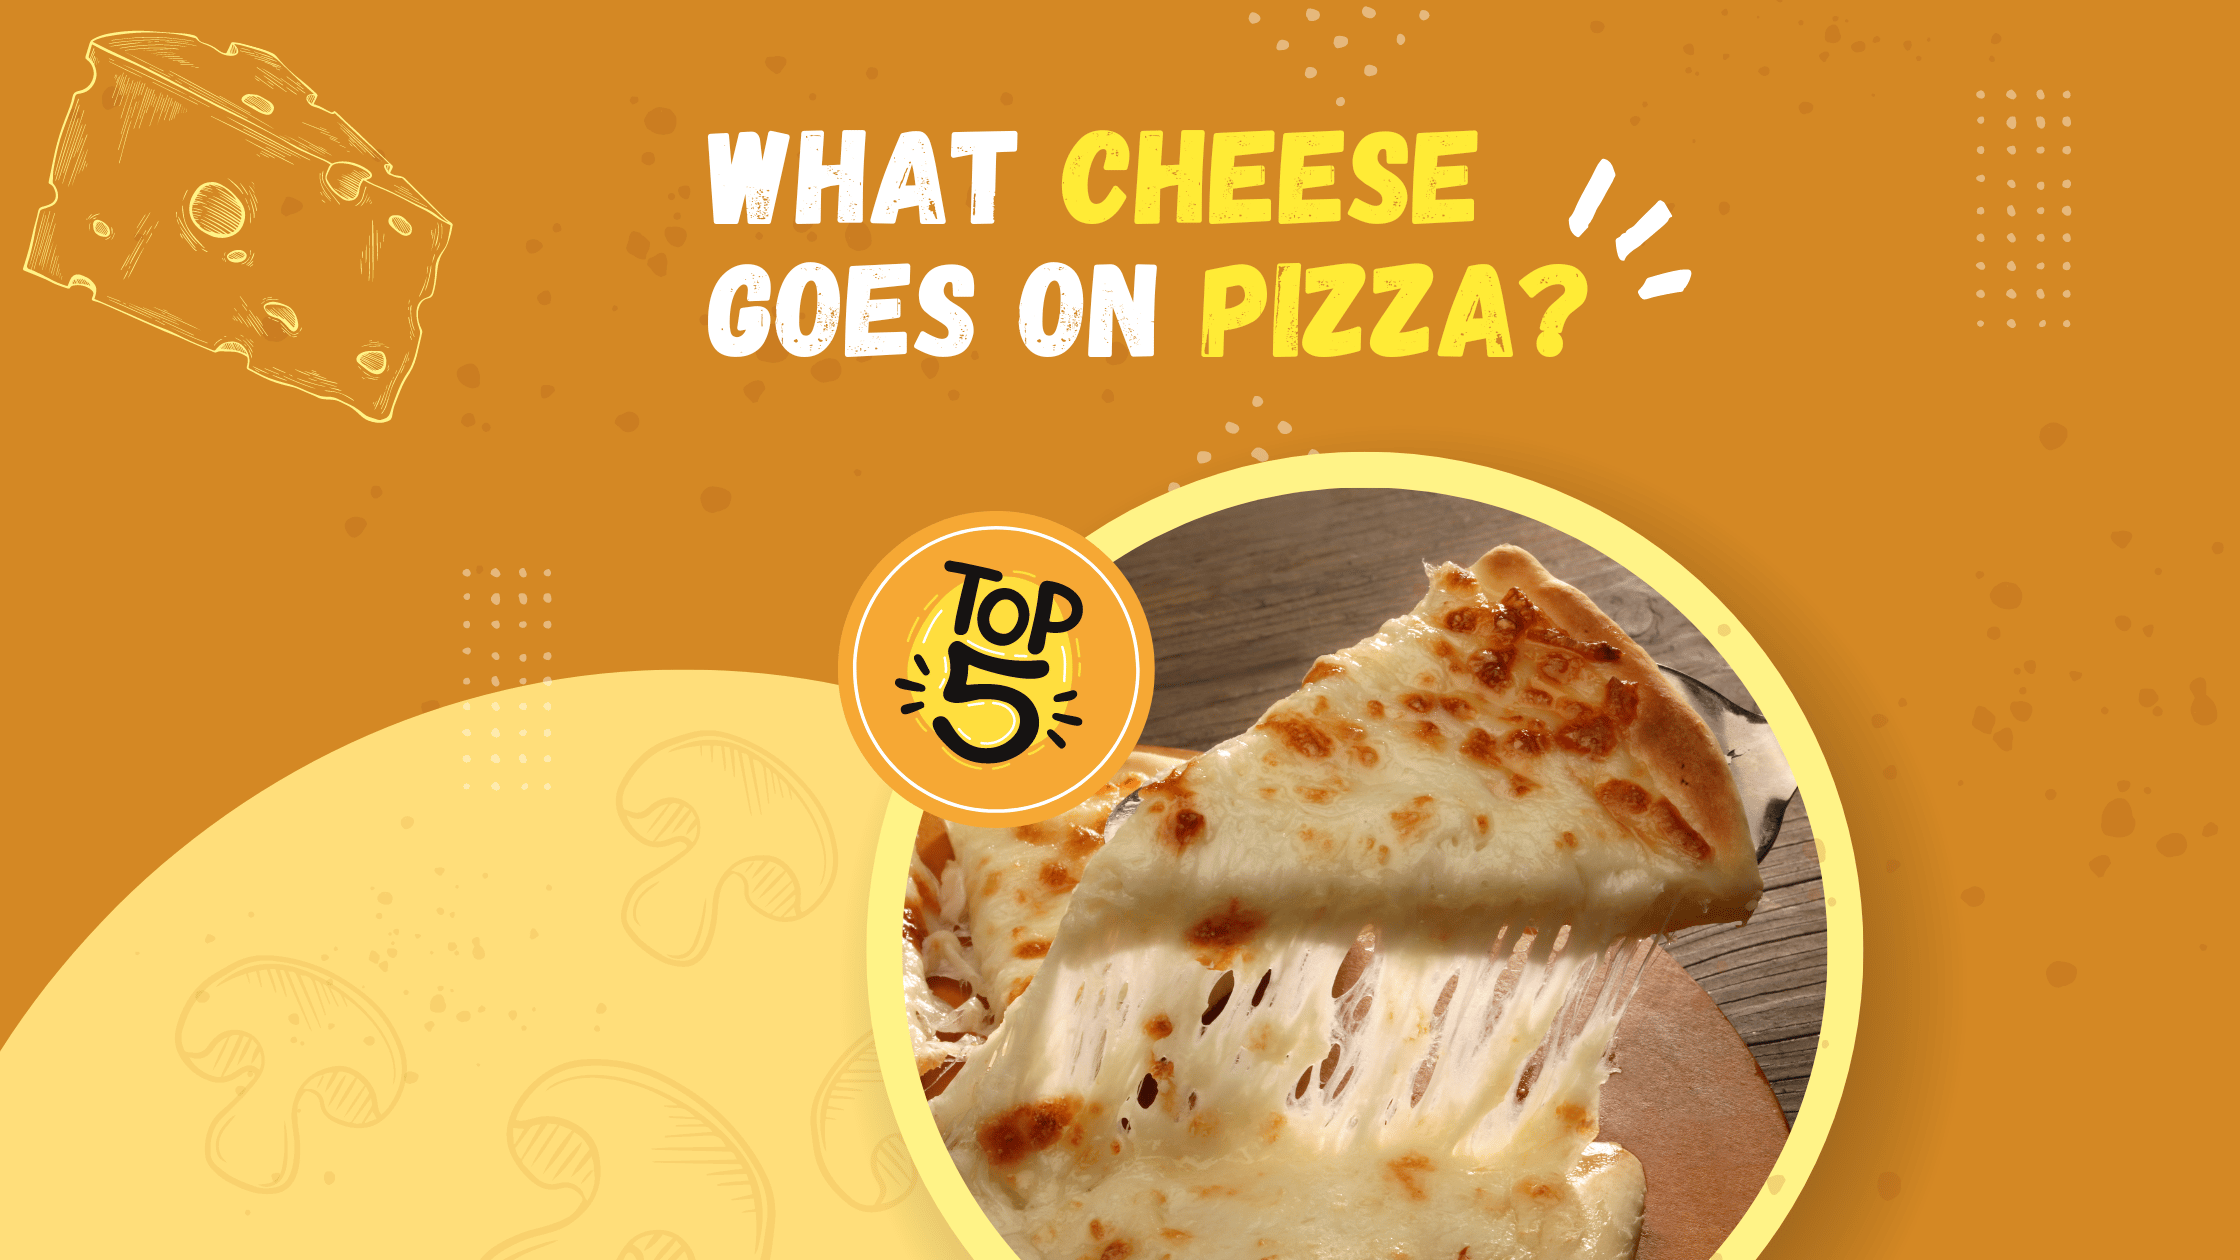 What Cheese Goes on Pizza? Find the Top Cheeses for Pizza